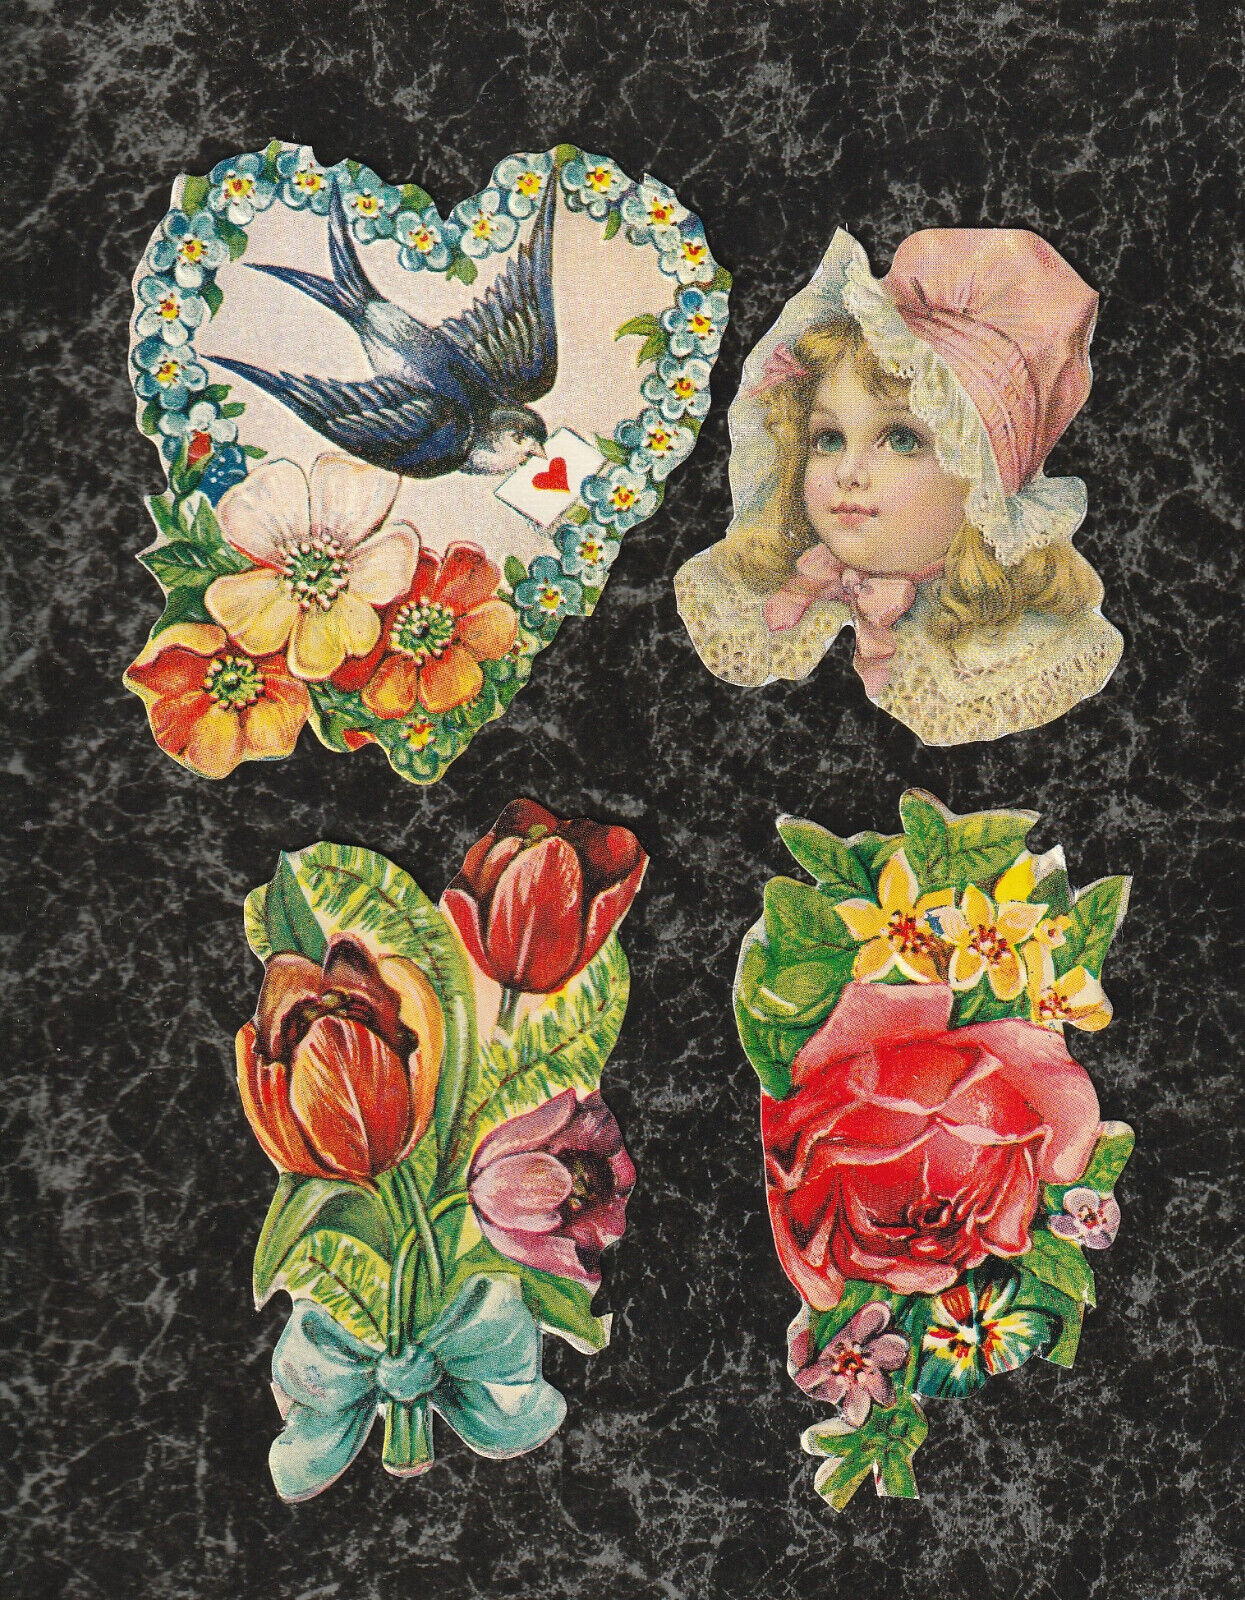 Lot 4 Repro Die Cut Embossed Scraps Little Girl Swallow Tulips Rose 2 to 3 inch